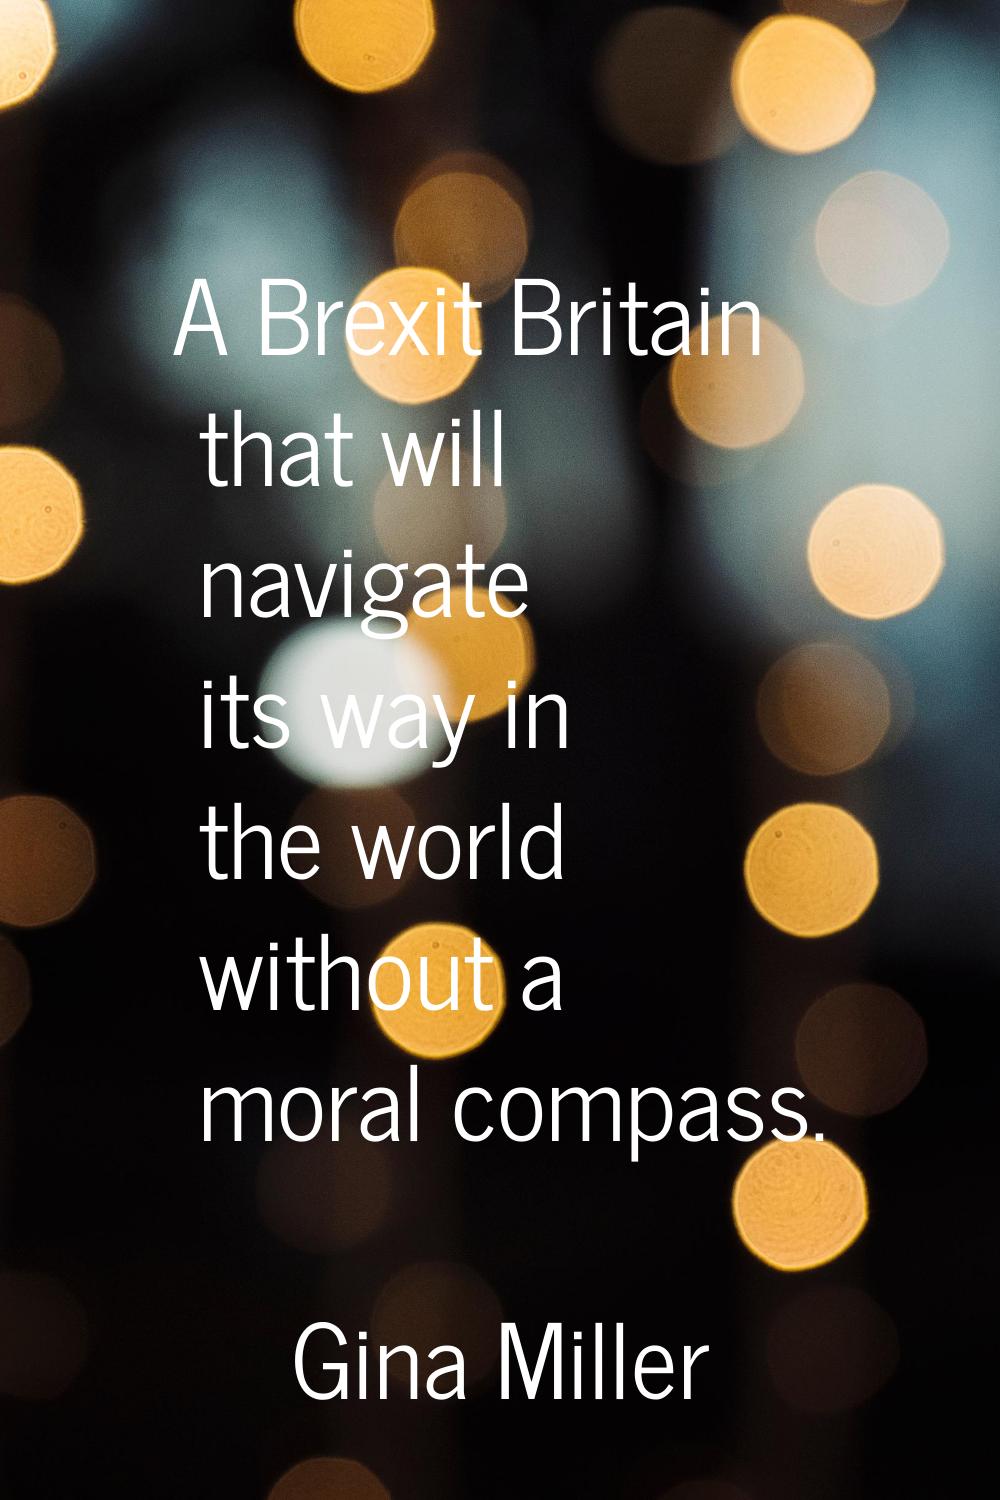 A Brexit Britain that will navigate its way in the world without a moral compass.